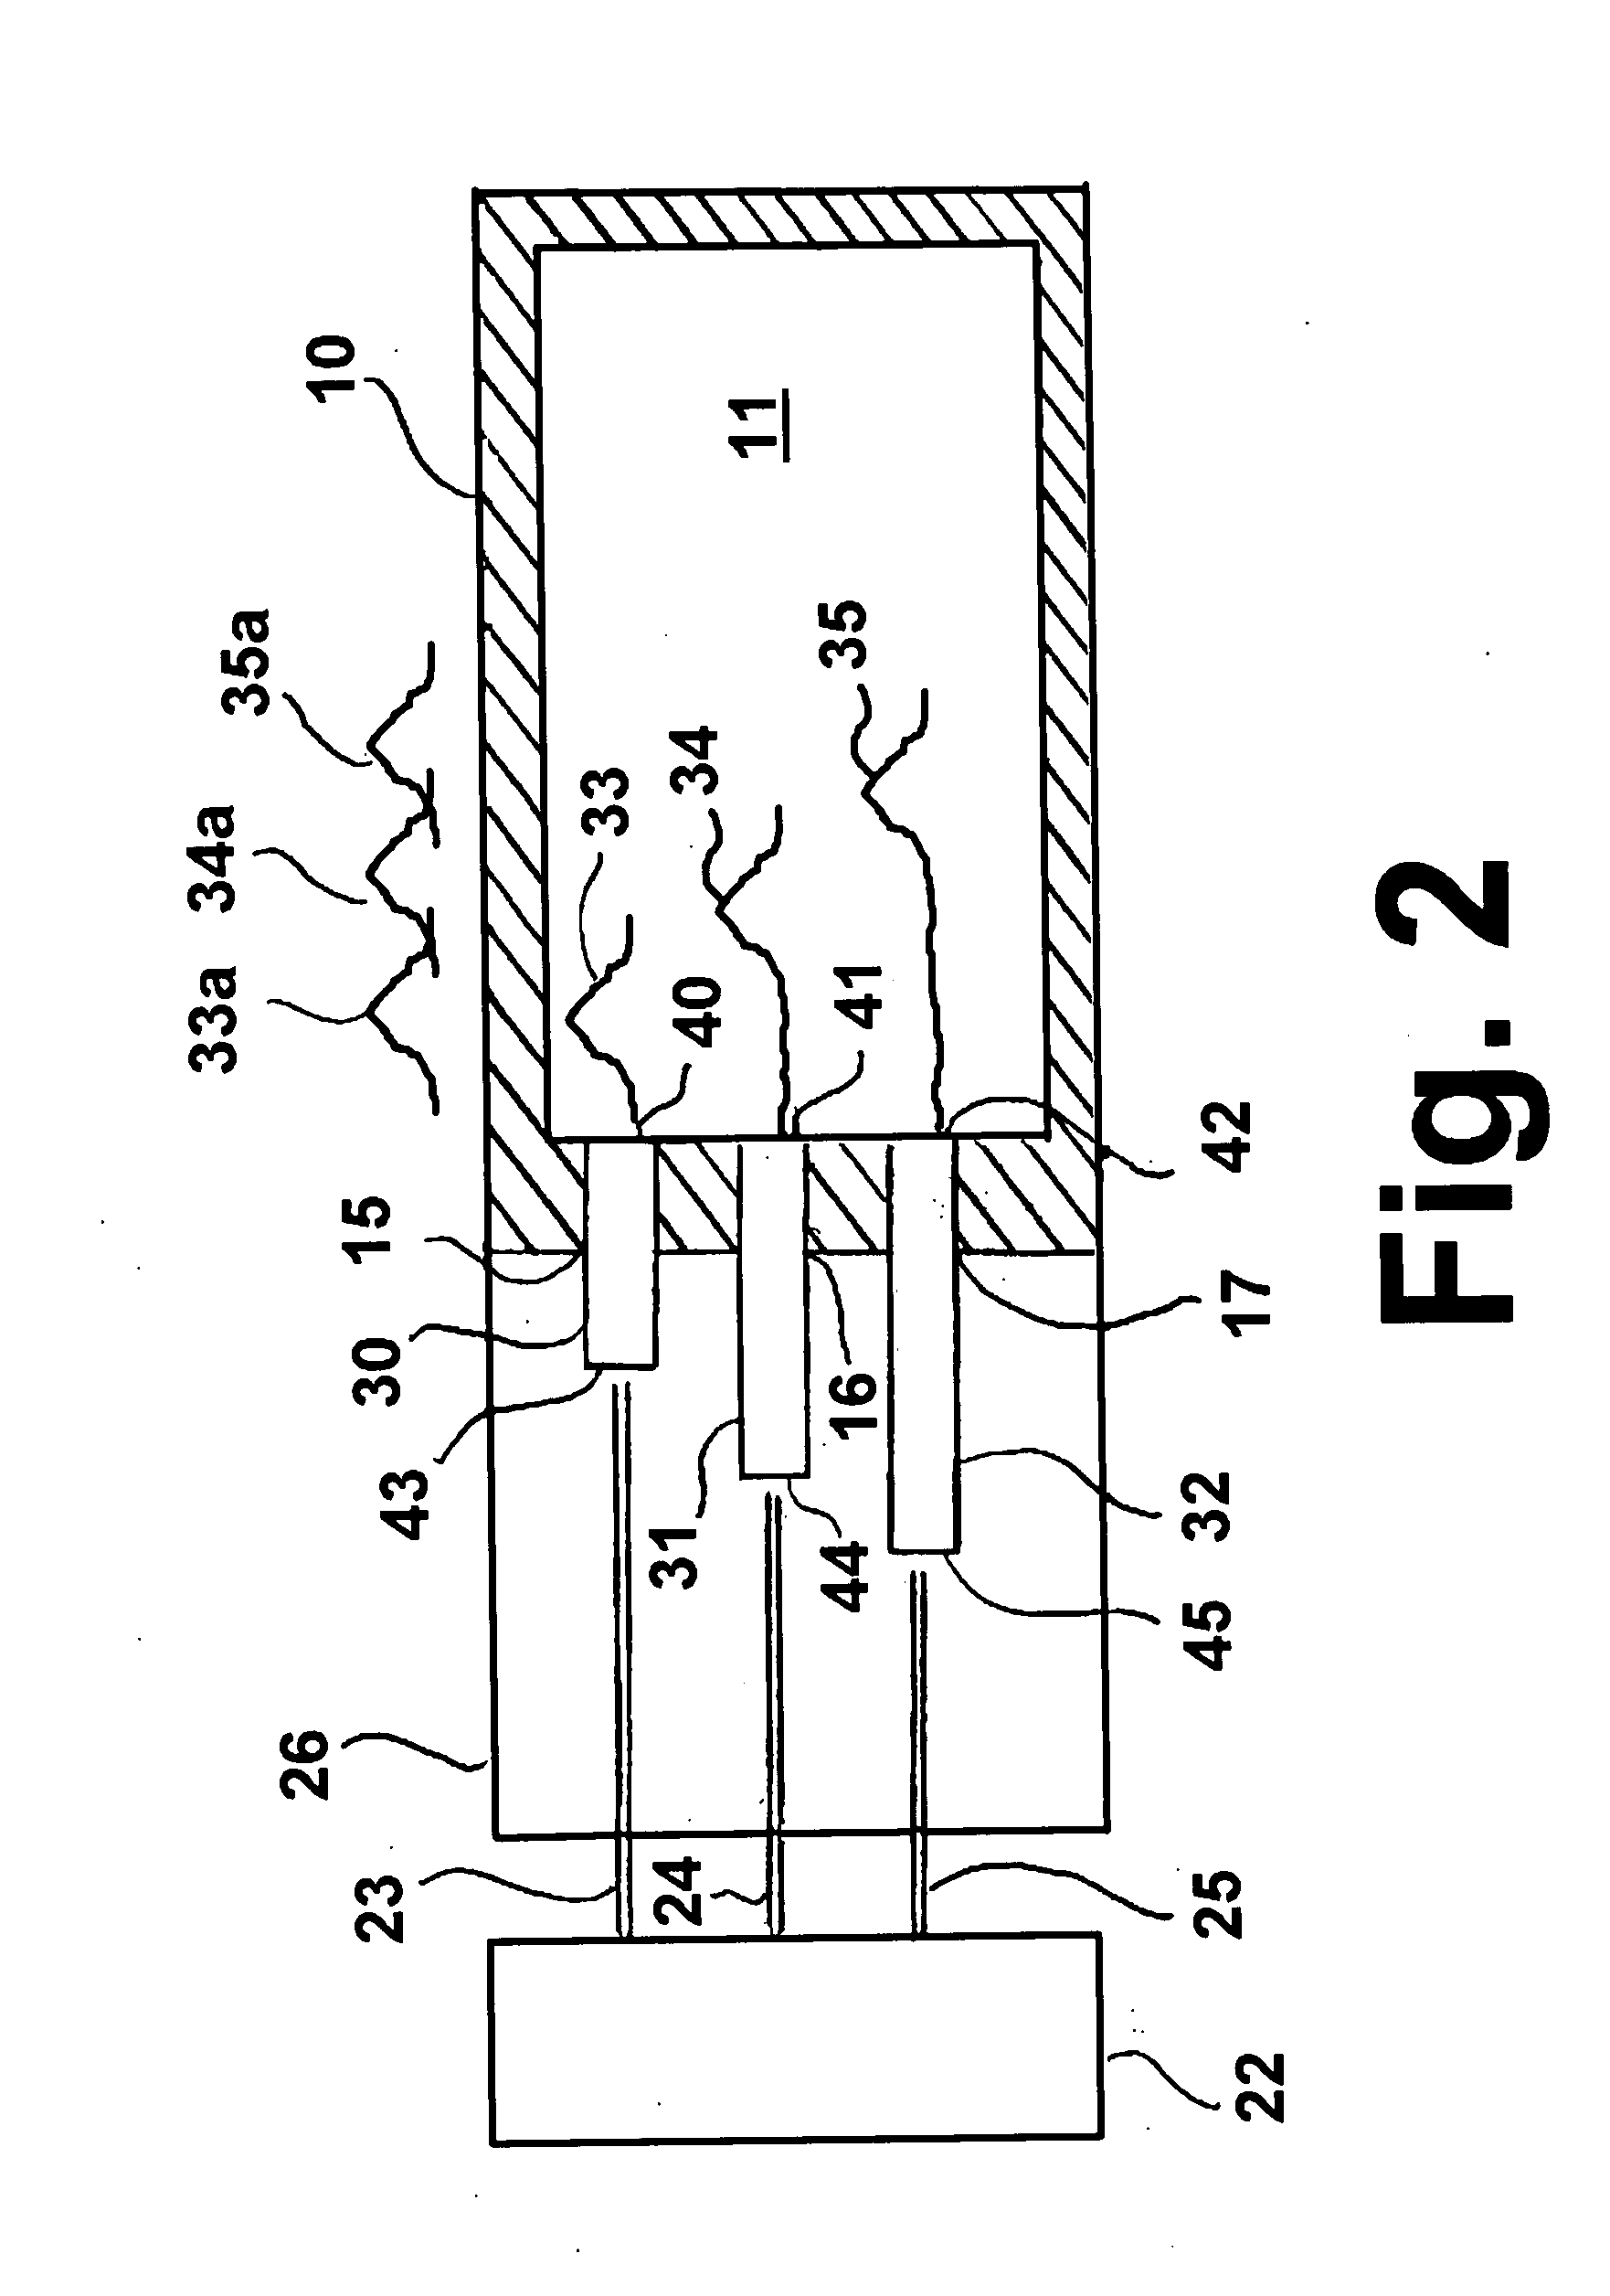 Multi-response time burner system for controlling combustion driven pulsation